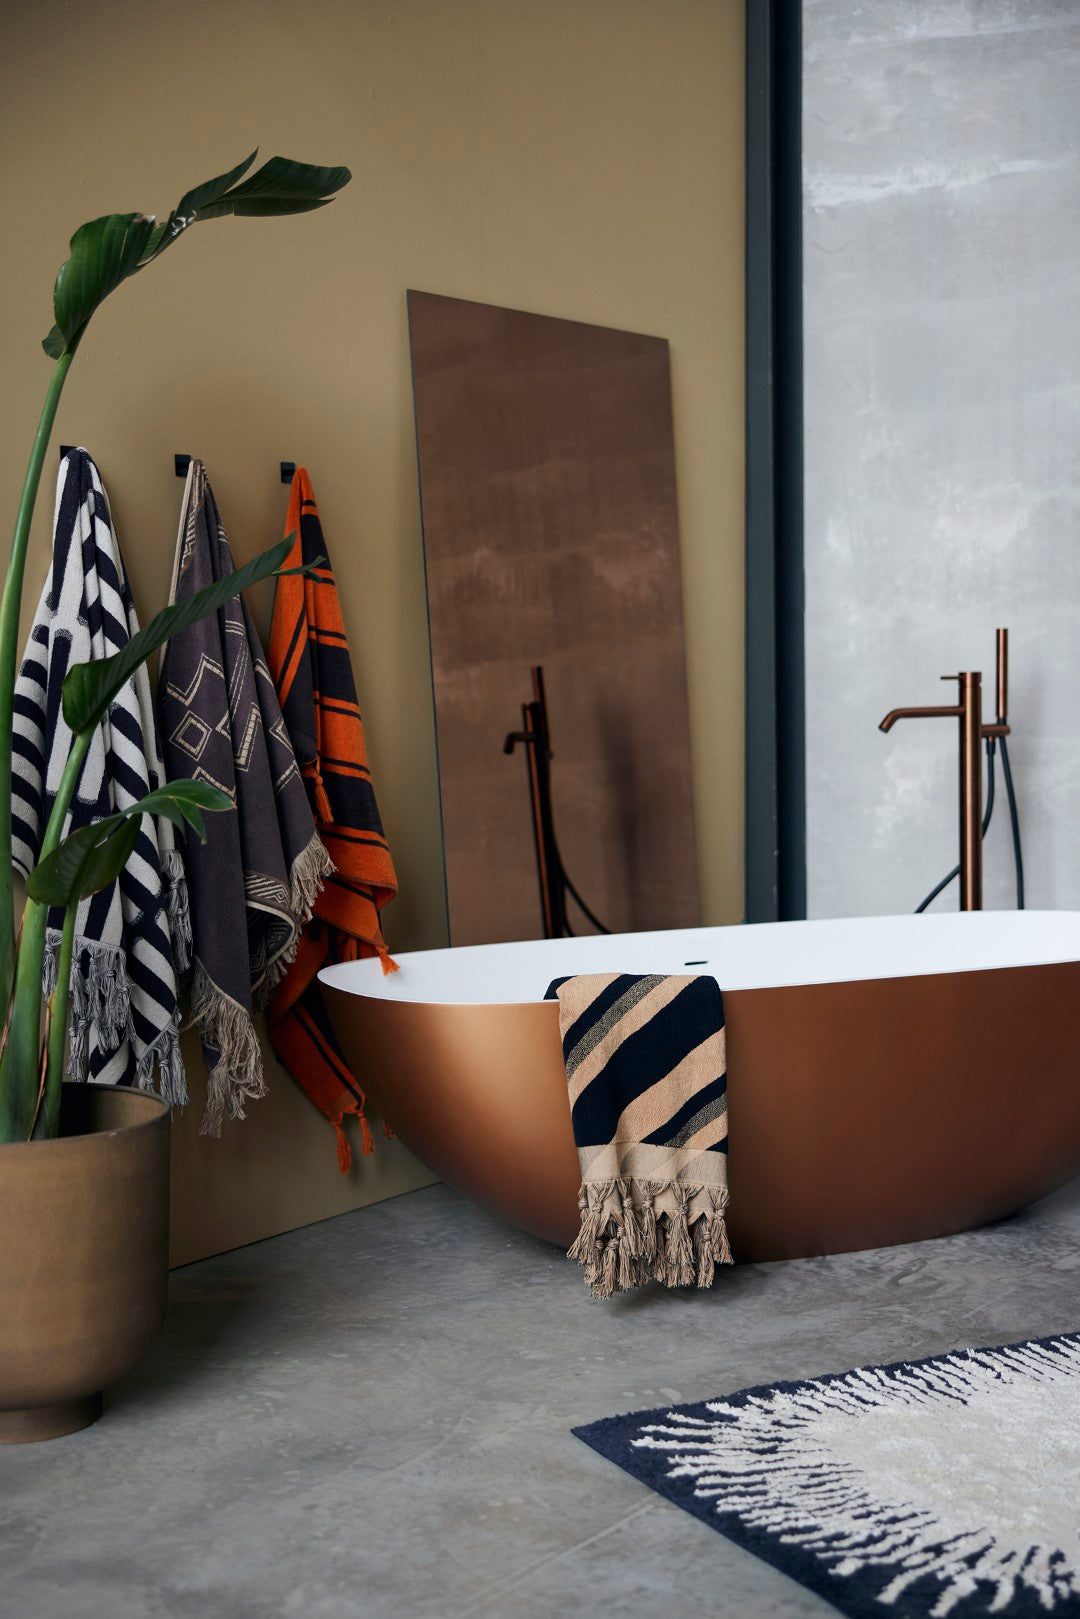 brown and black diagonal striped bath towel with fringes hanging over a brass colored bath tub